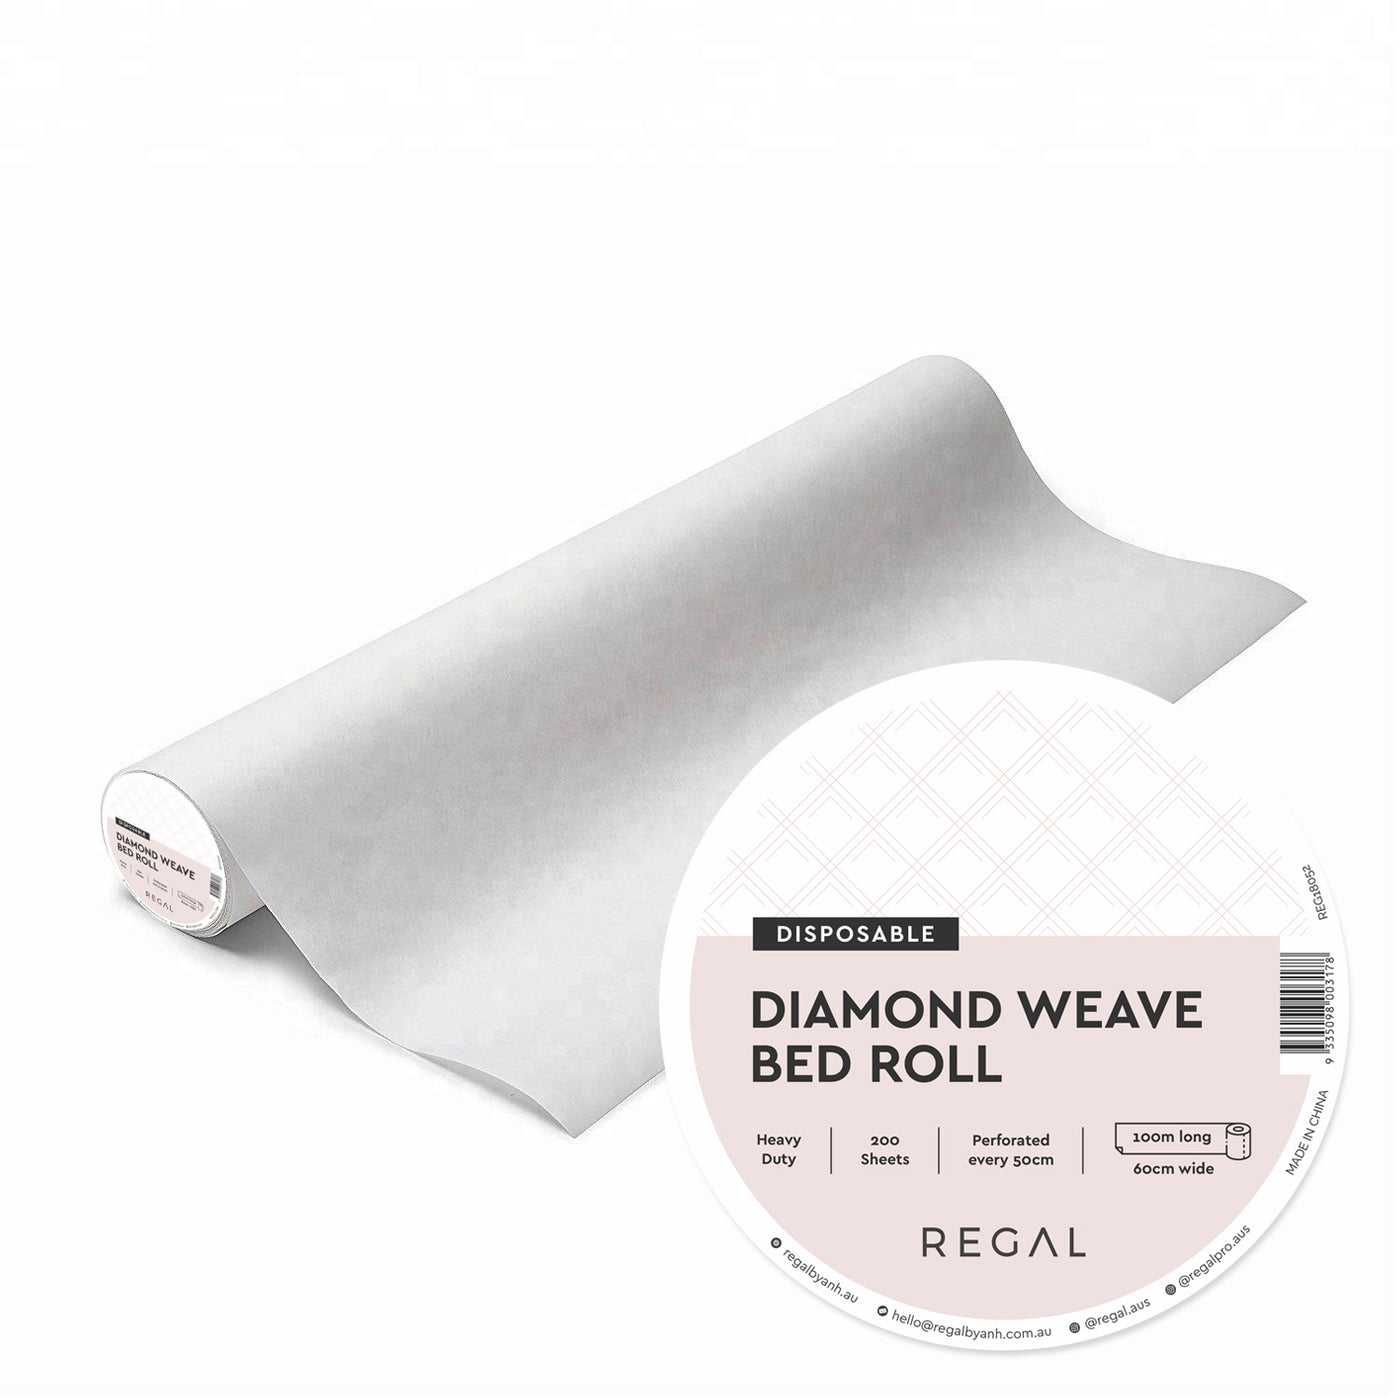 Regal by Anh Disposable Heavy Duty Perforated Diamond Weave Bed Roll 100m x 60cm 200 sheets